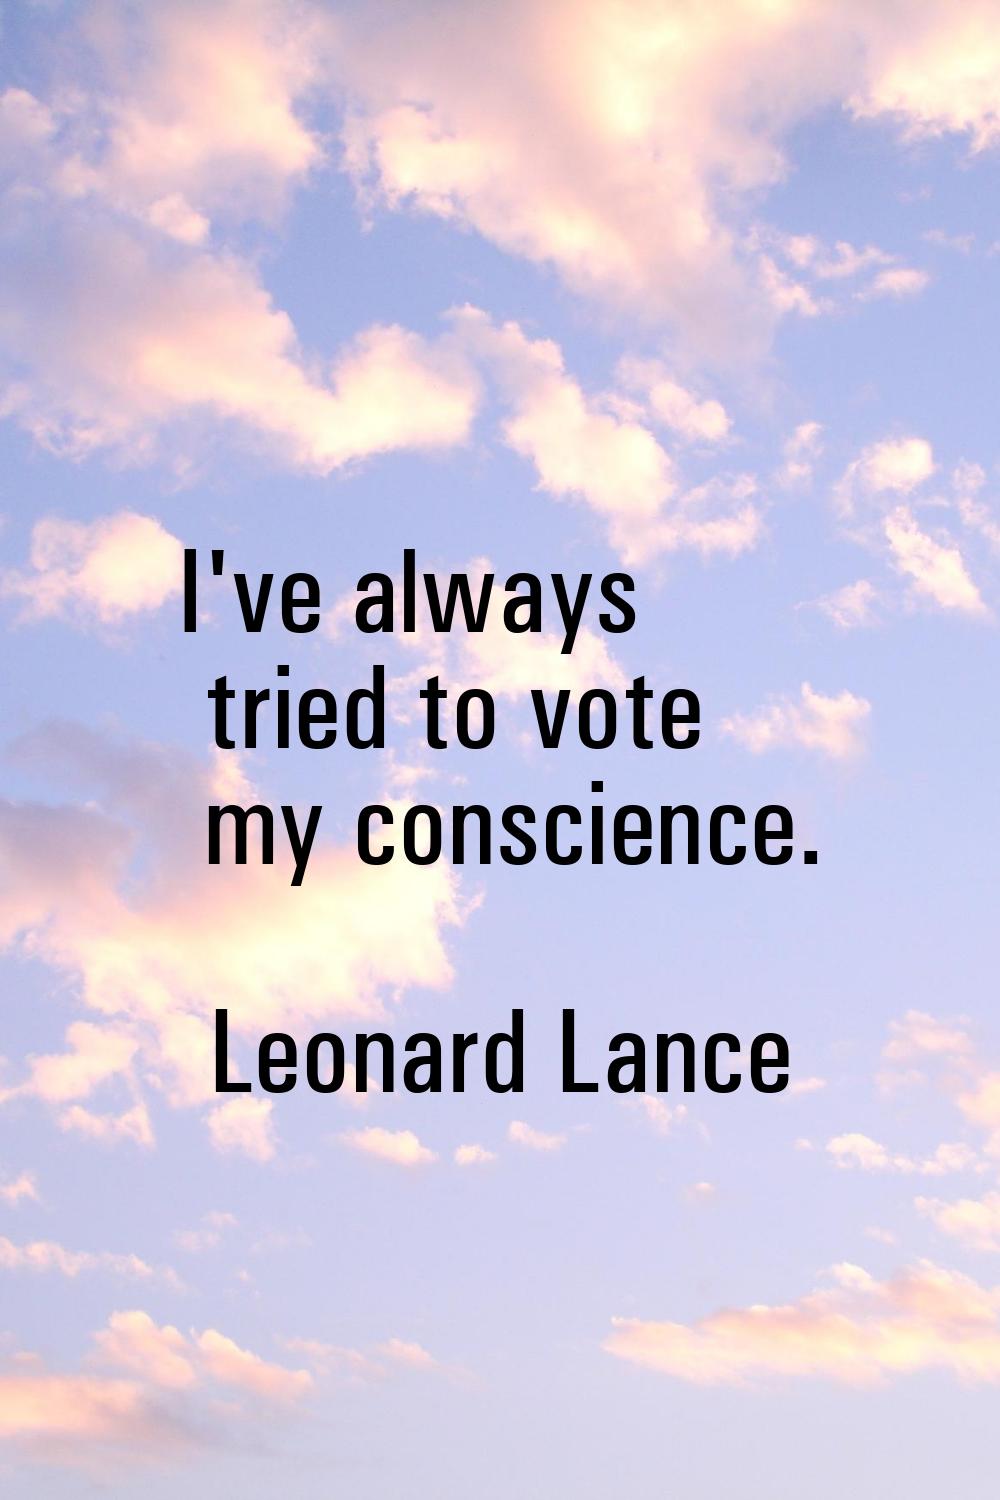 I've always tried to vote my conscience.